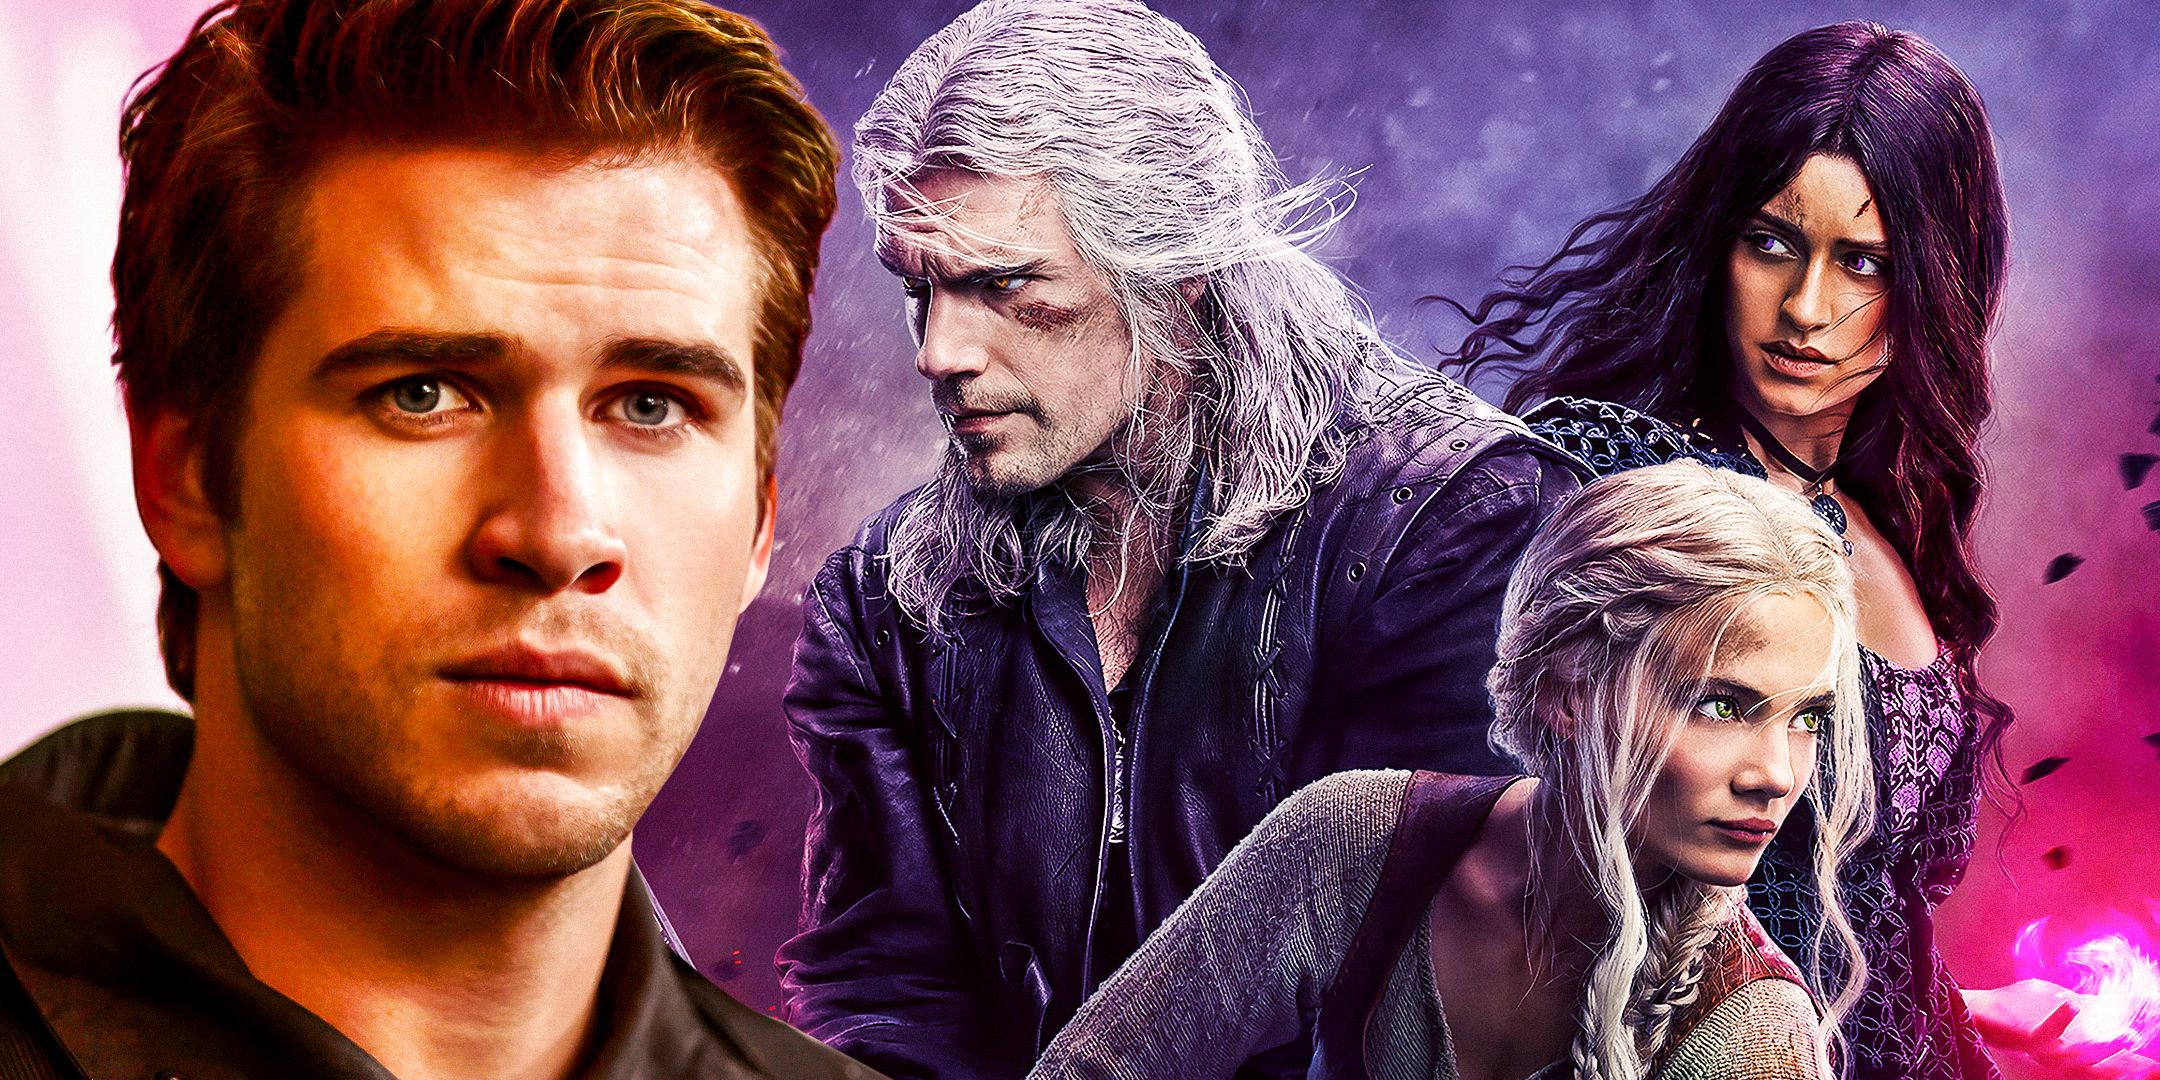 Liam Hemsworth as Gale in The Hunger Games and Geralt, Yennefer, and Ciri in The Witcher